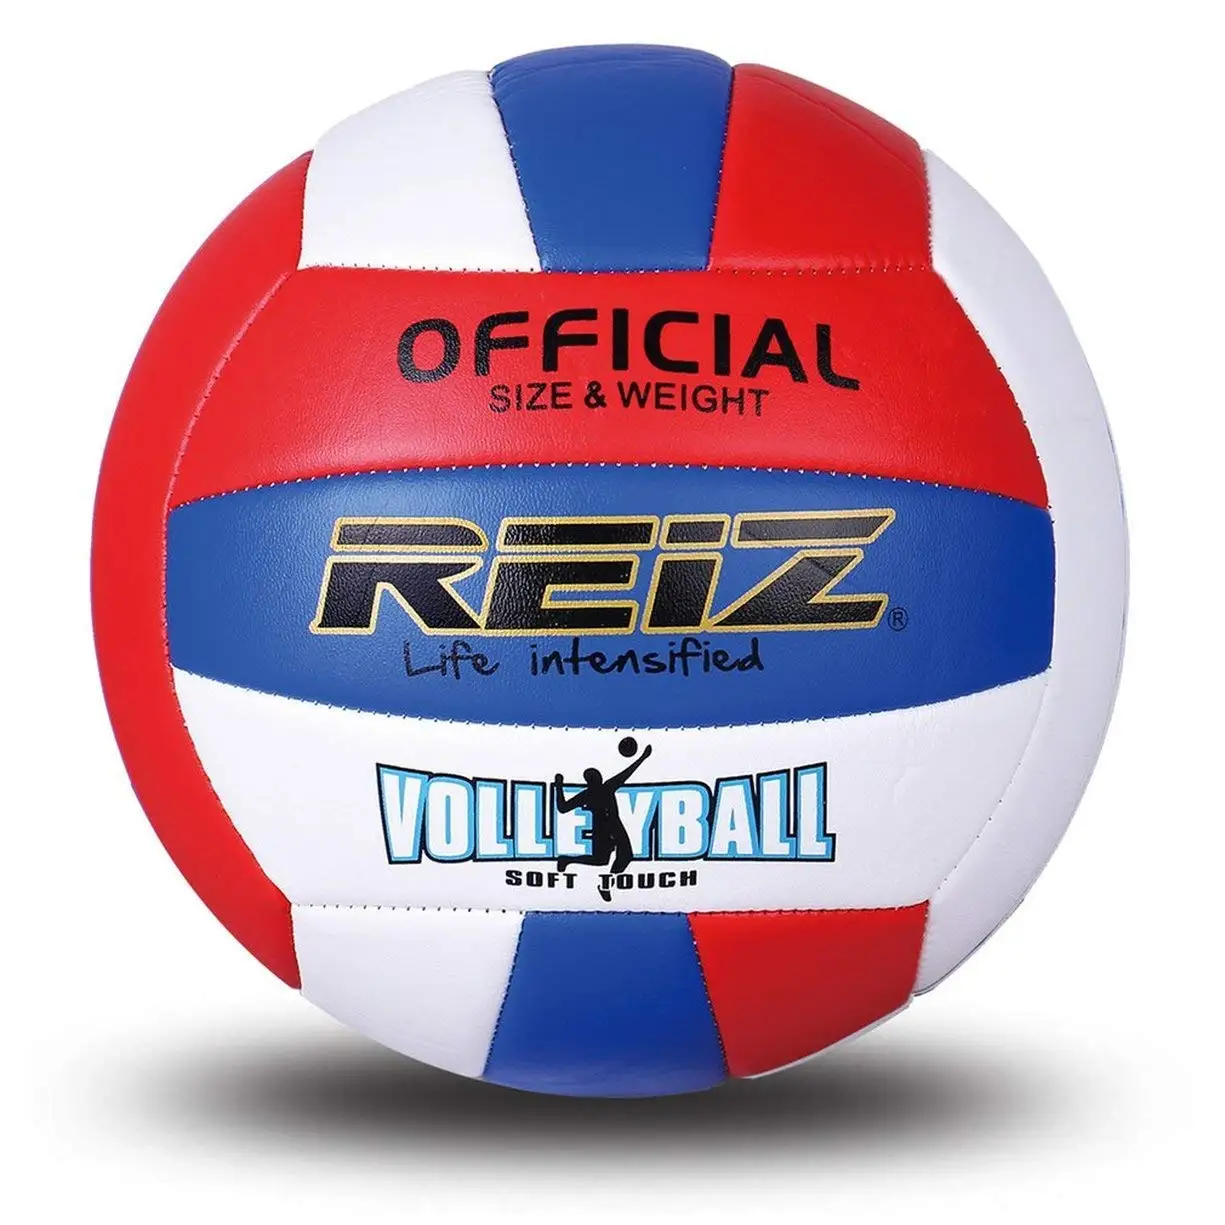 VETRA Volleyball Soft Touch Volley Ball Official Size 5 Yellow/Blue/White 